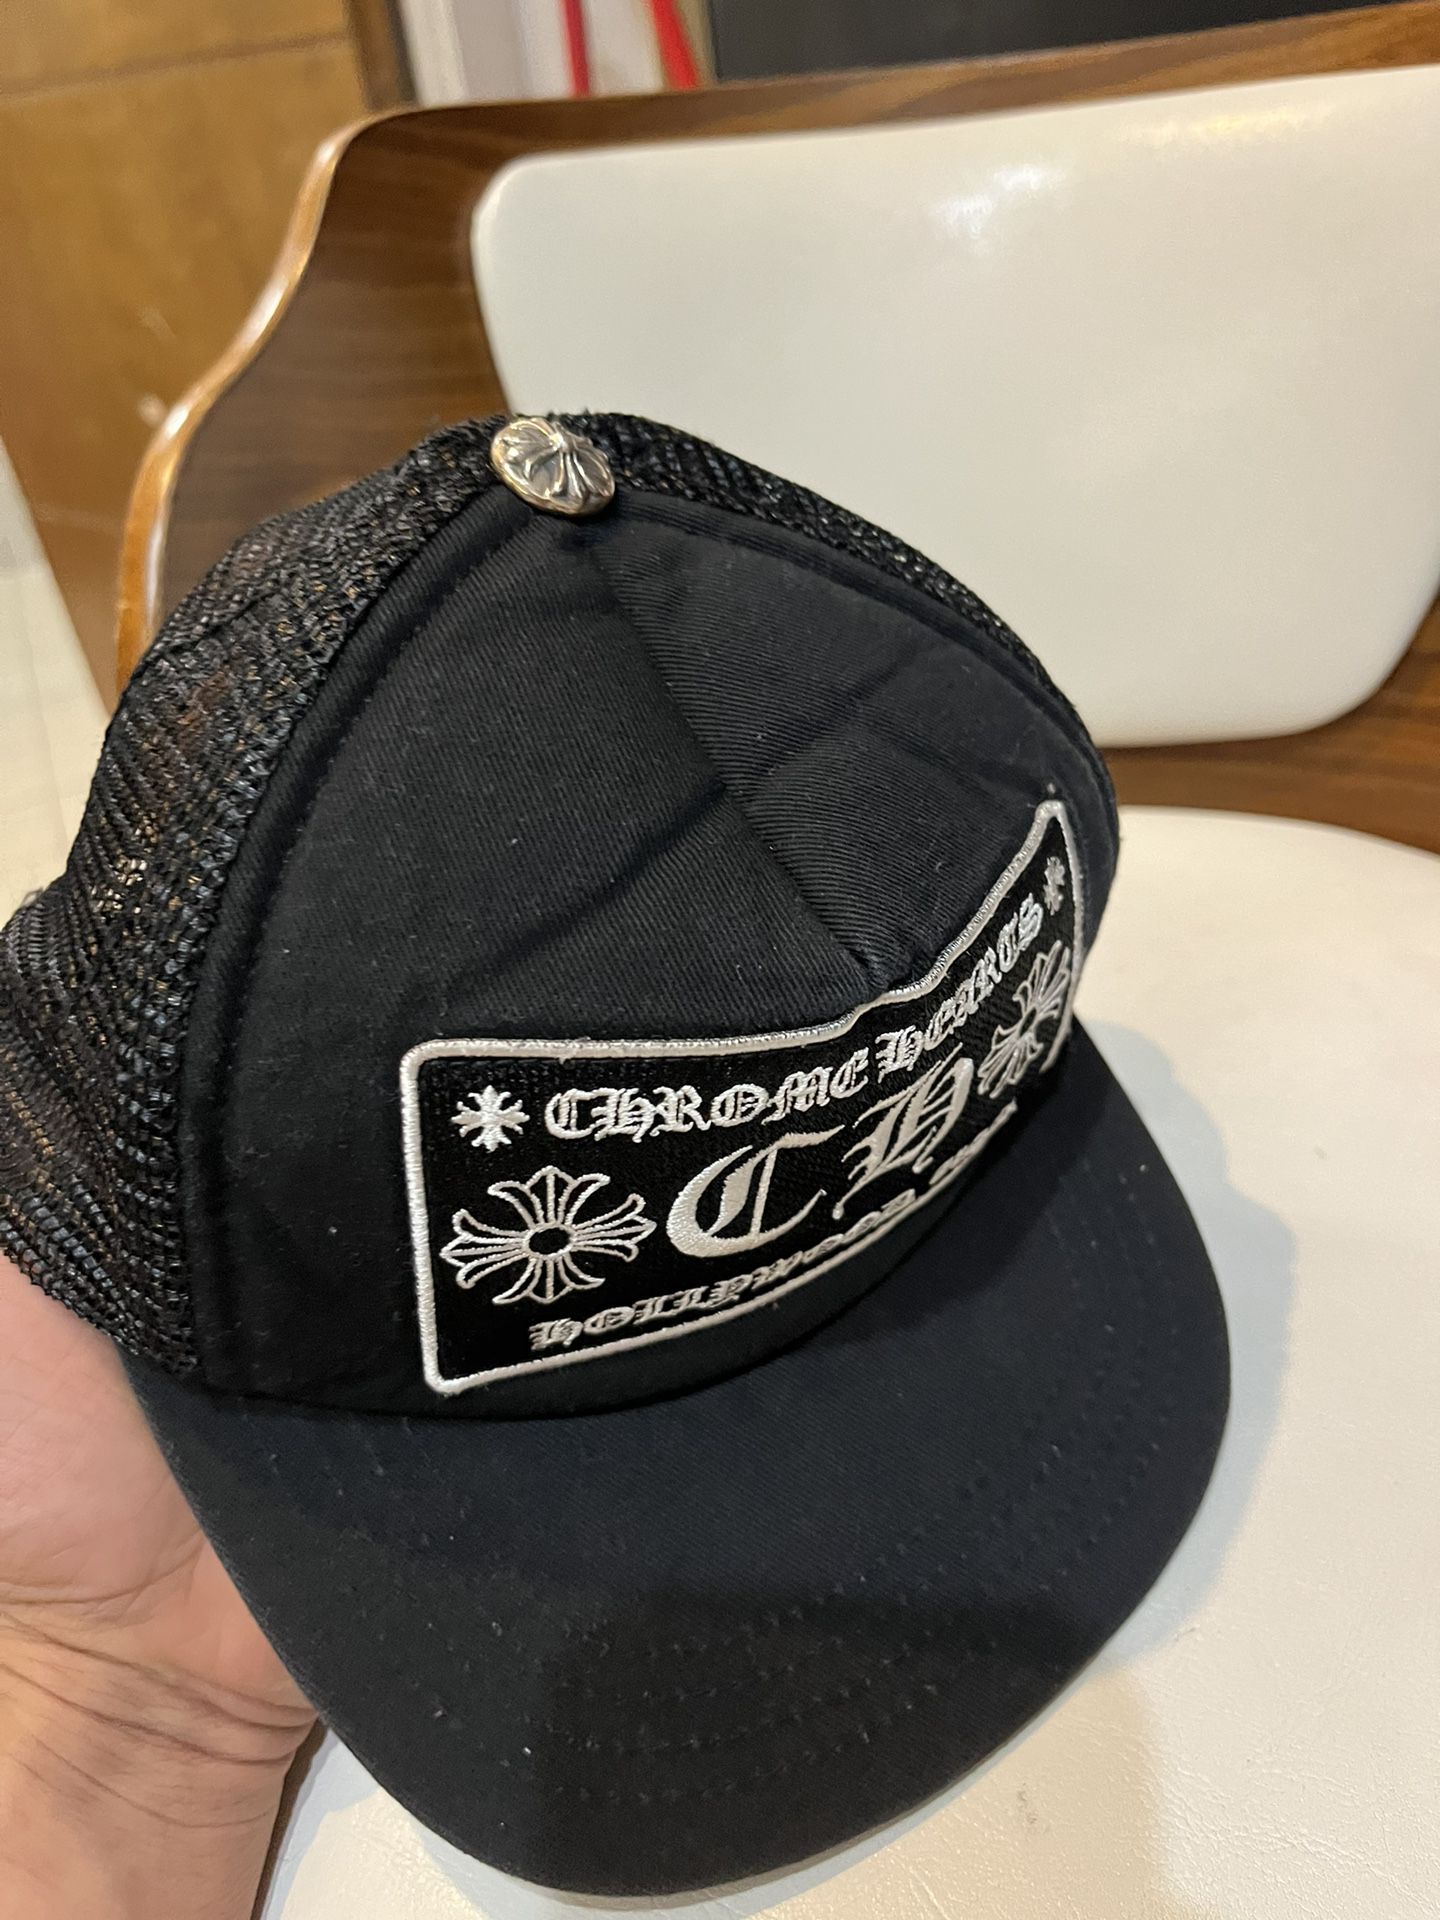 Rep Chrome hearts hat for Sale in Brooklyn, NY - OfferUp